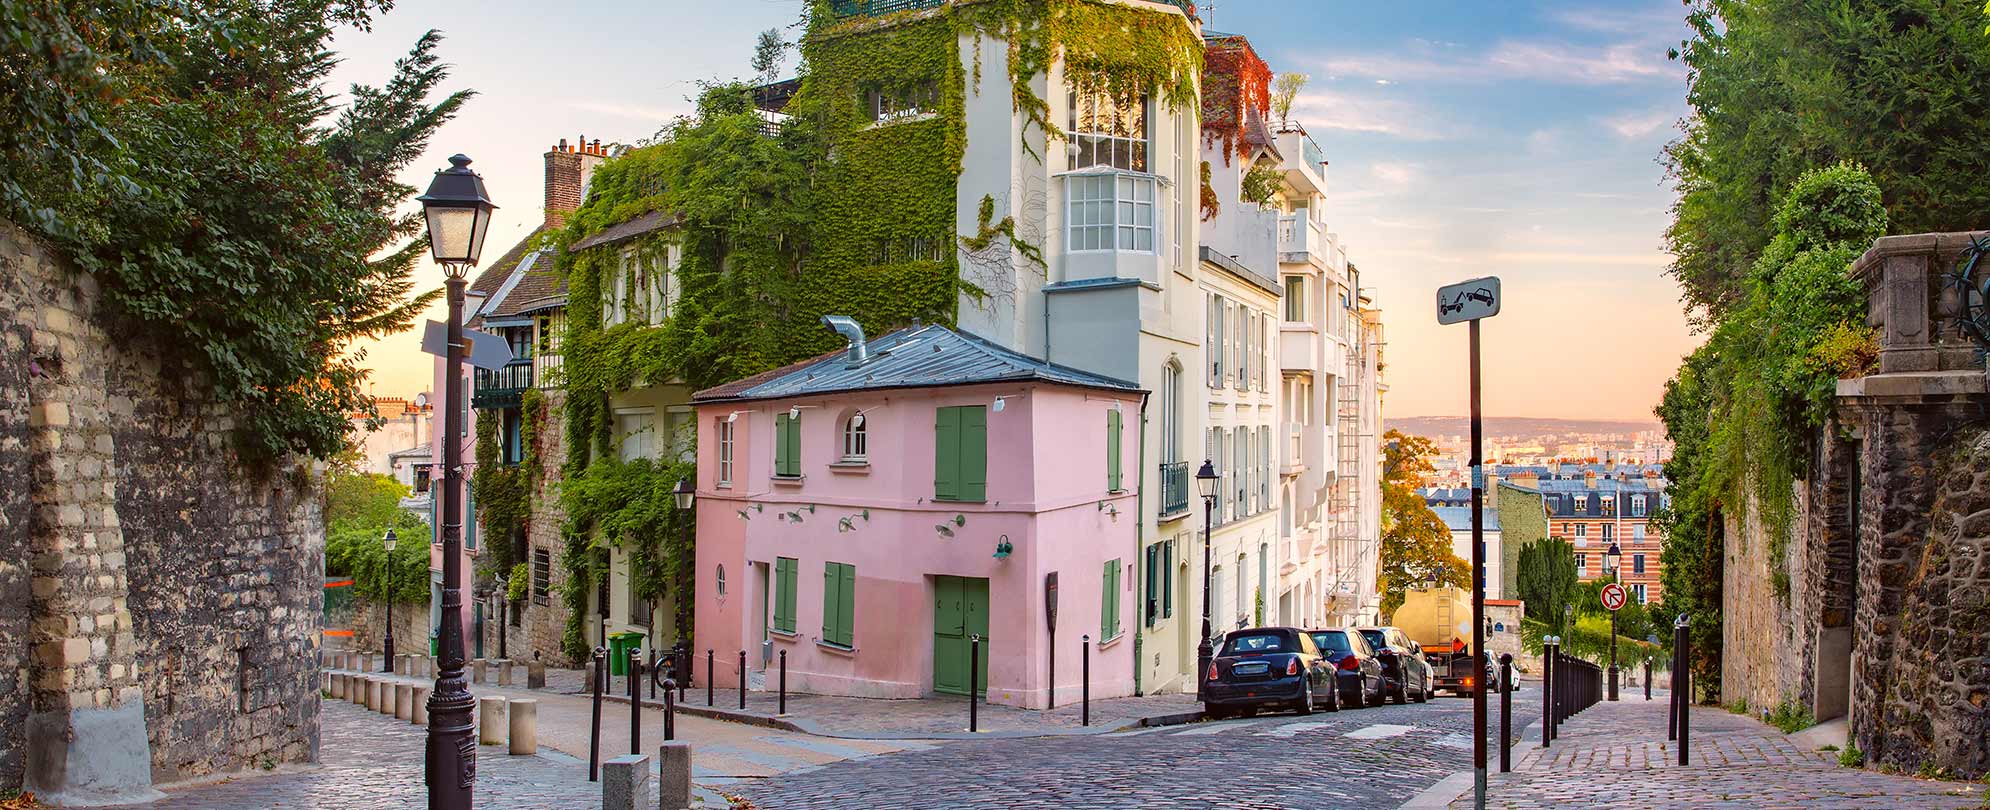 Cozy old street with pink house at the sunny sunrise quarter montmartre in paris france, a stop on a paris Normandy cruise.